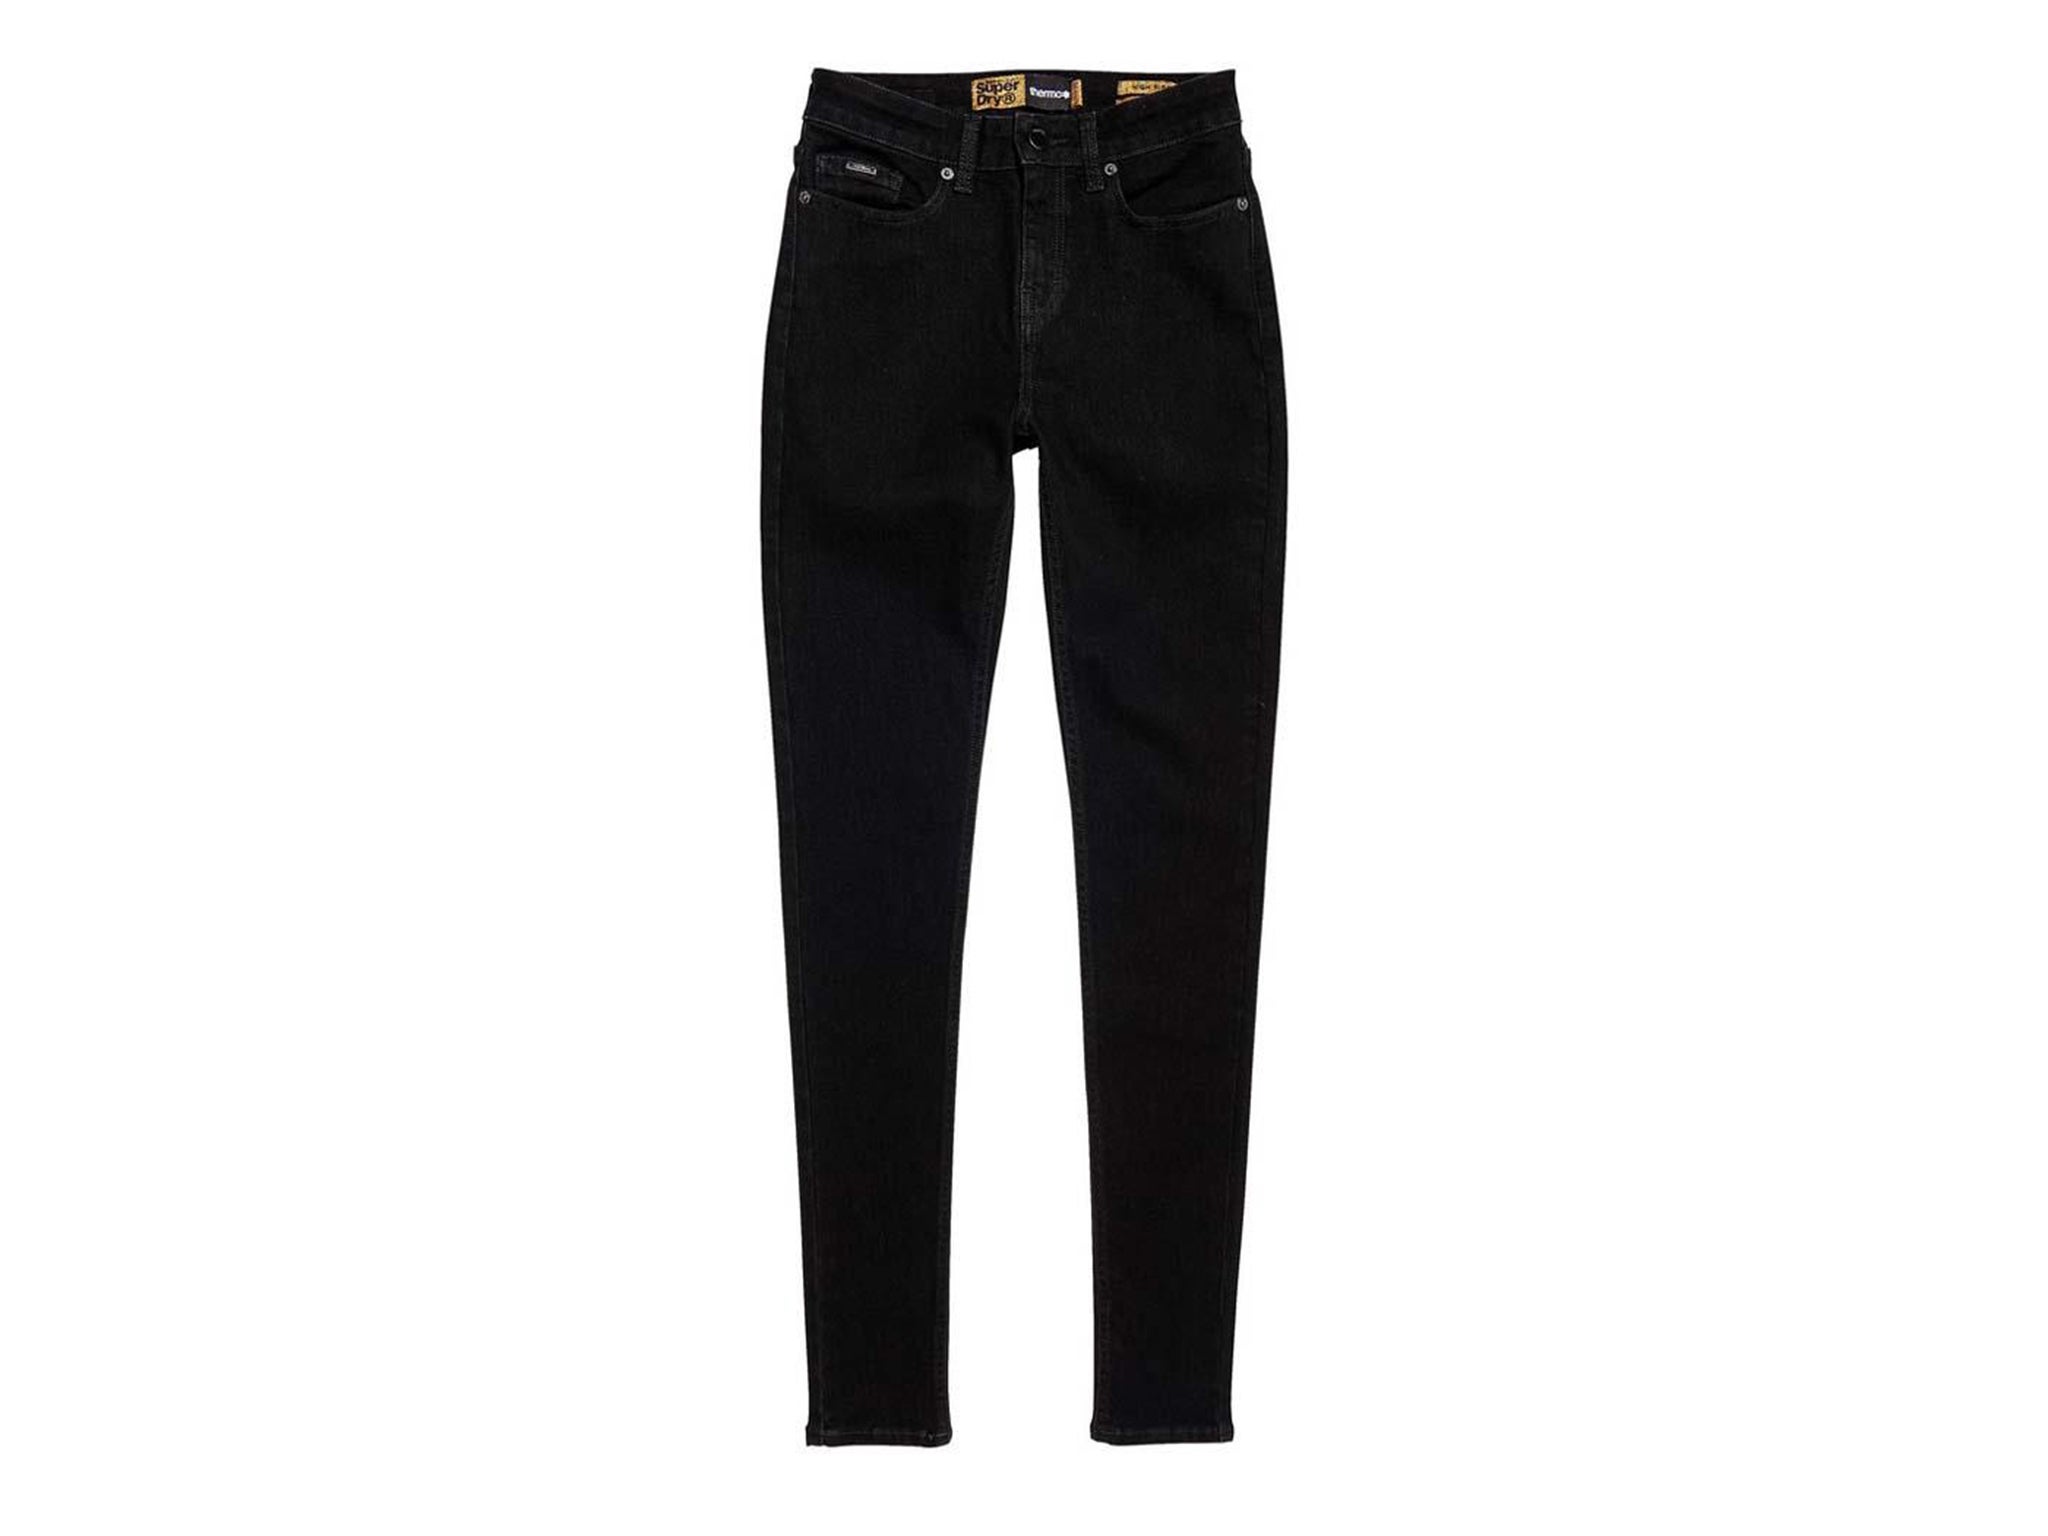 Fleece-lined jeans: High-waisted trousers that keep you warm | The ...